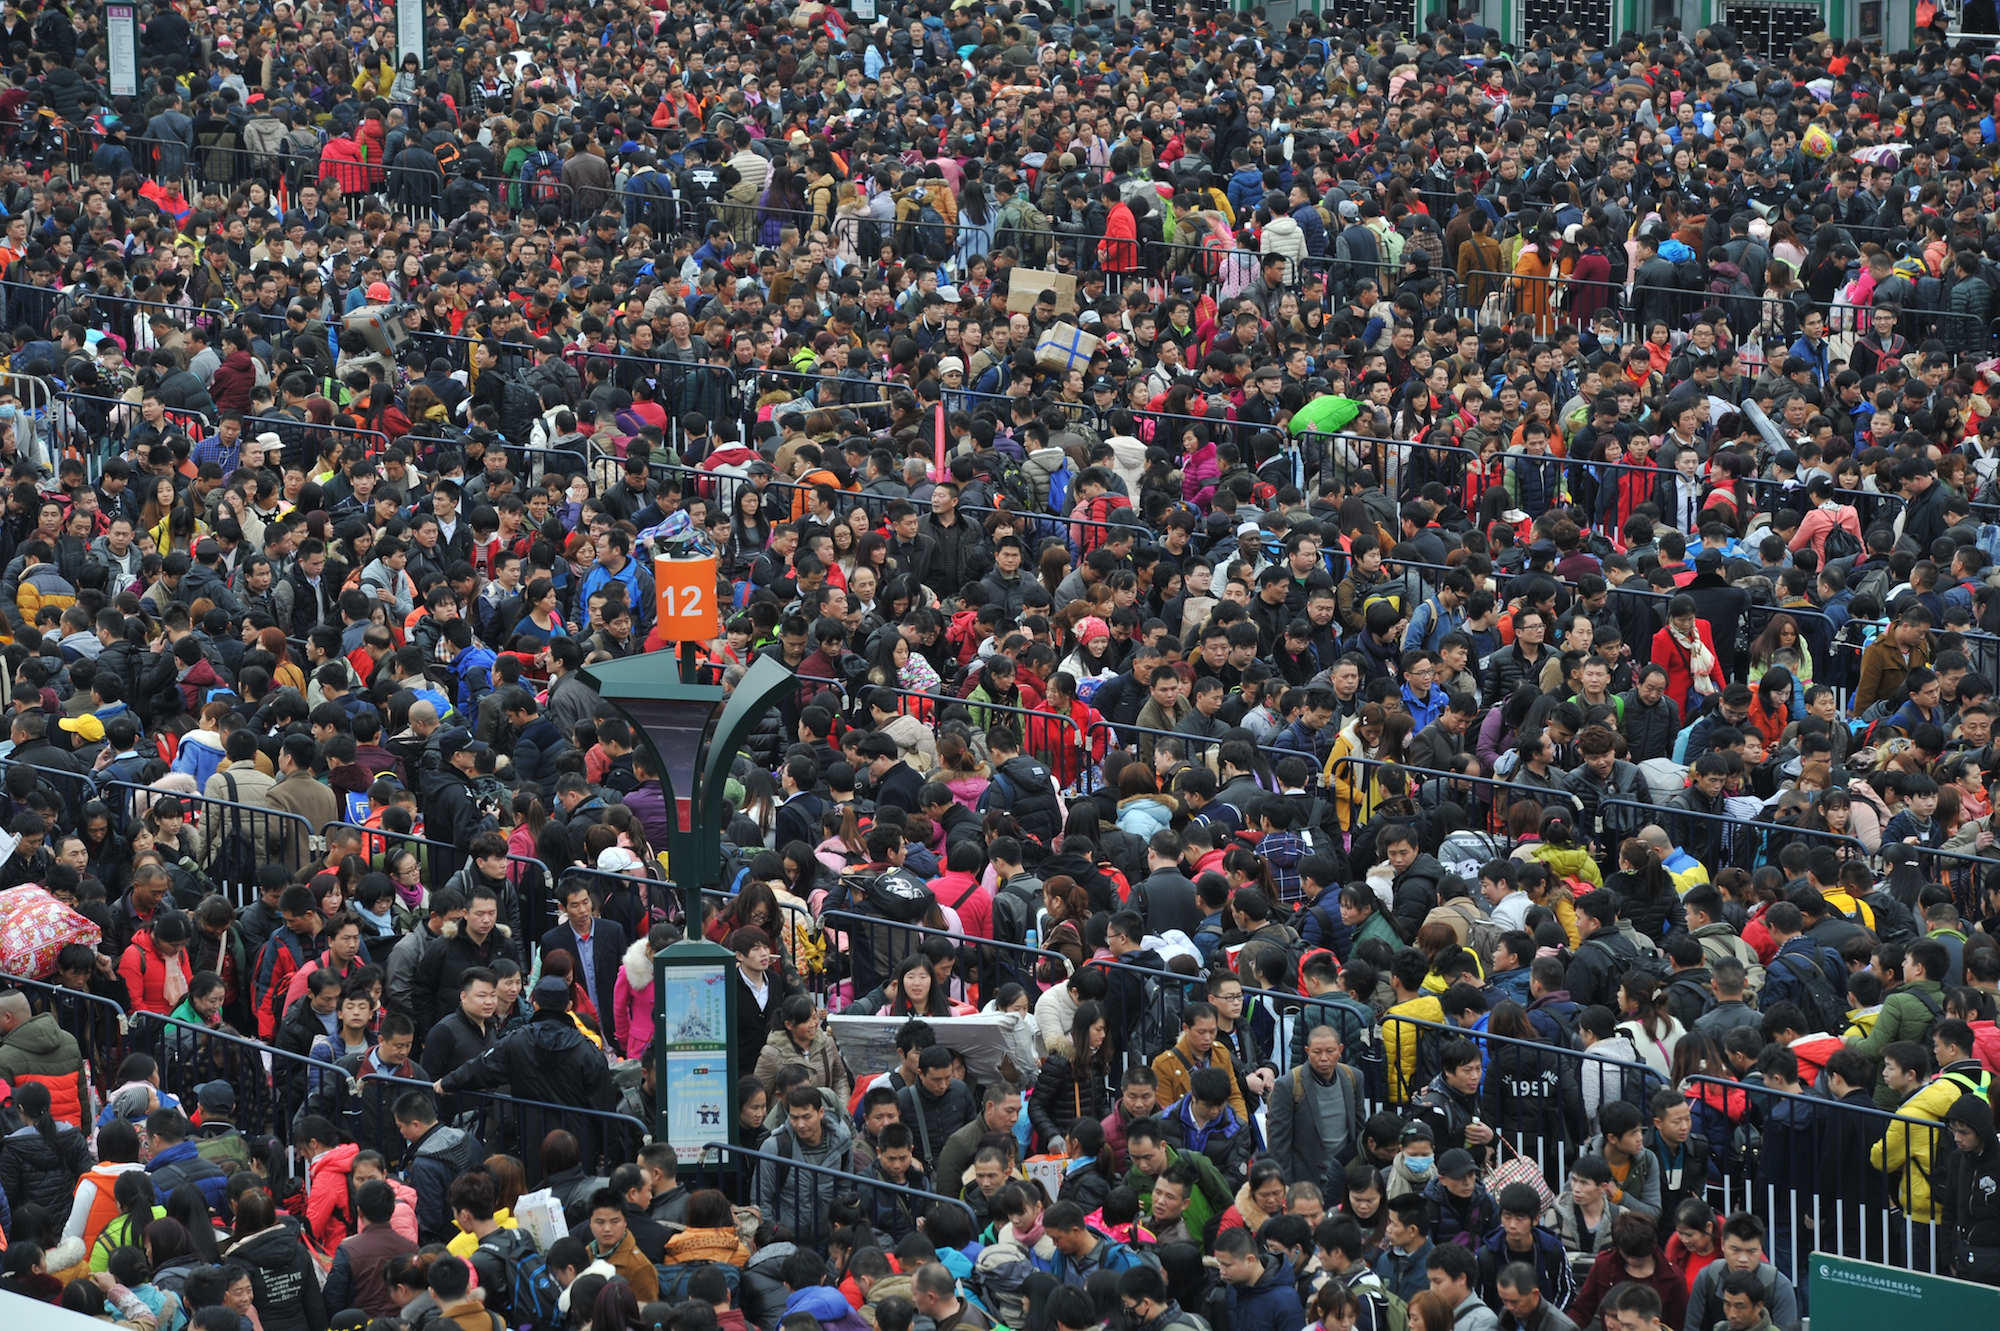 Thousands Of People Are Stuck In This Ridiculous Human Traffic Jam At A China Train Station